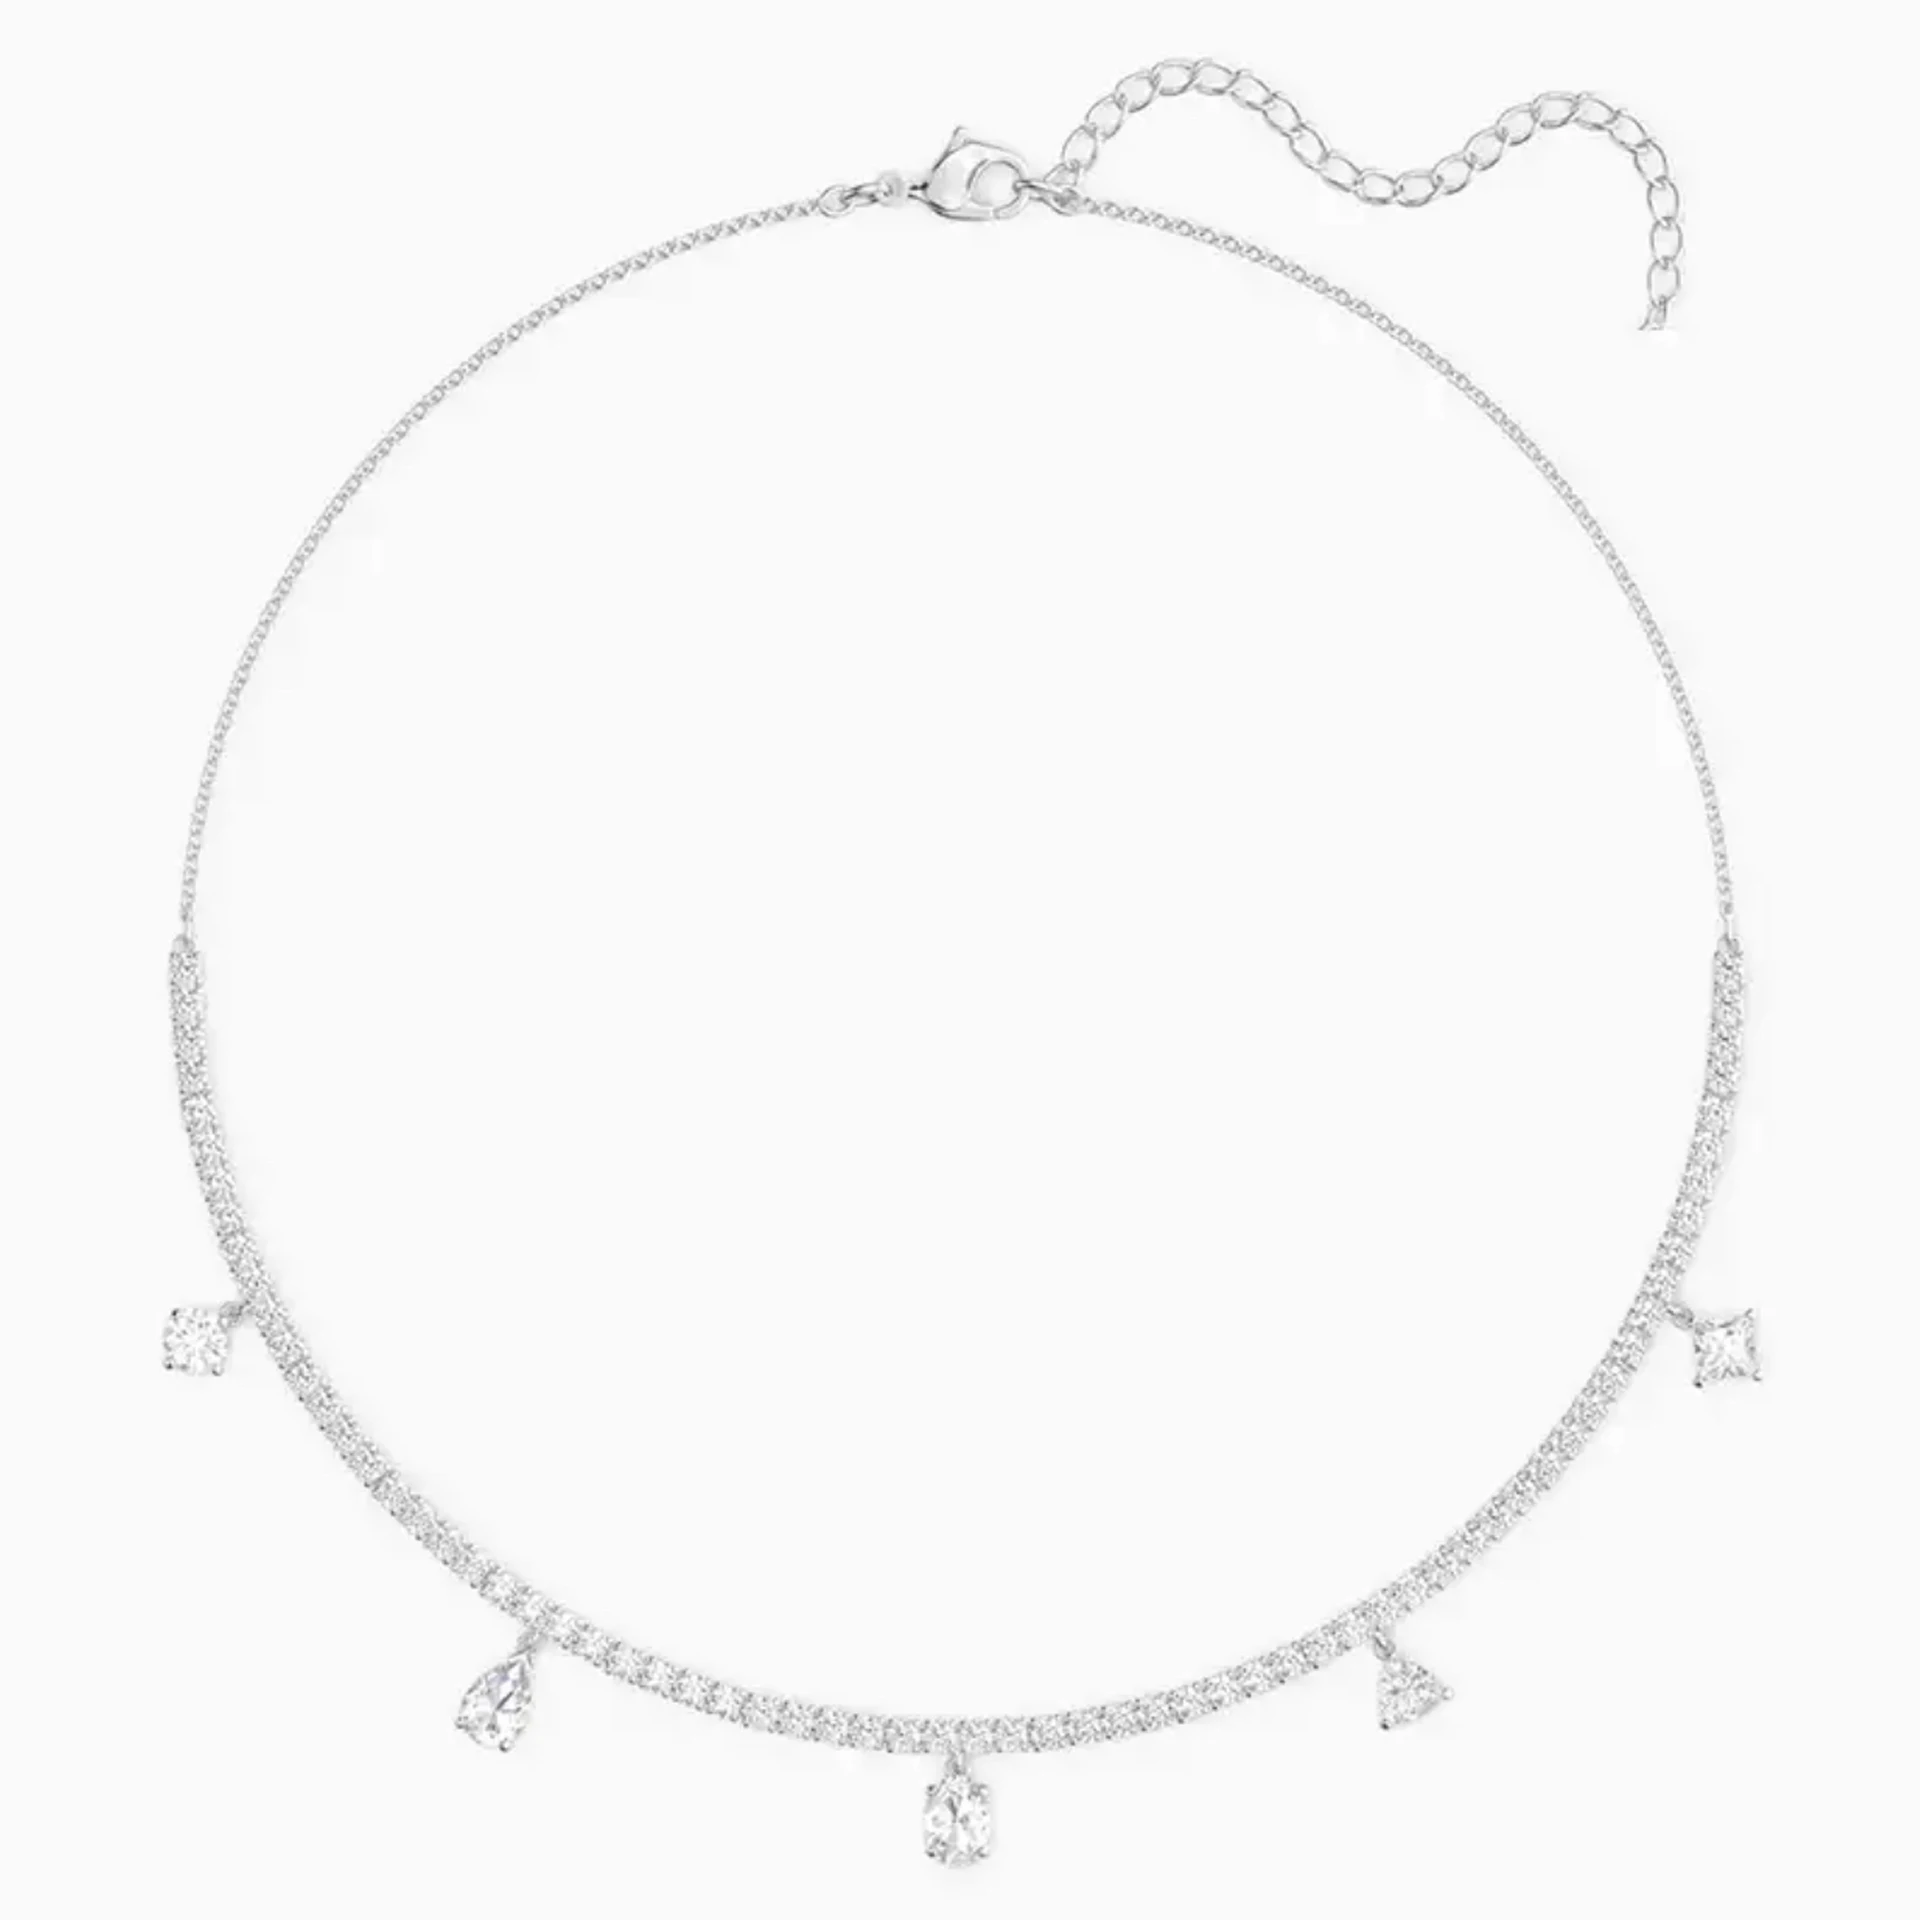 

SWA 2020 New Exquisite Design Tennis Deluxe Mixed Necklace, Charming Jewelry Is The Most Romantic Holiday Gift For Girlfriend